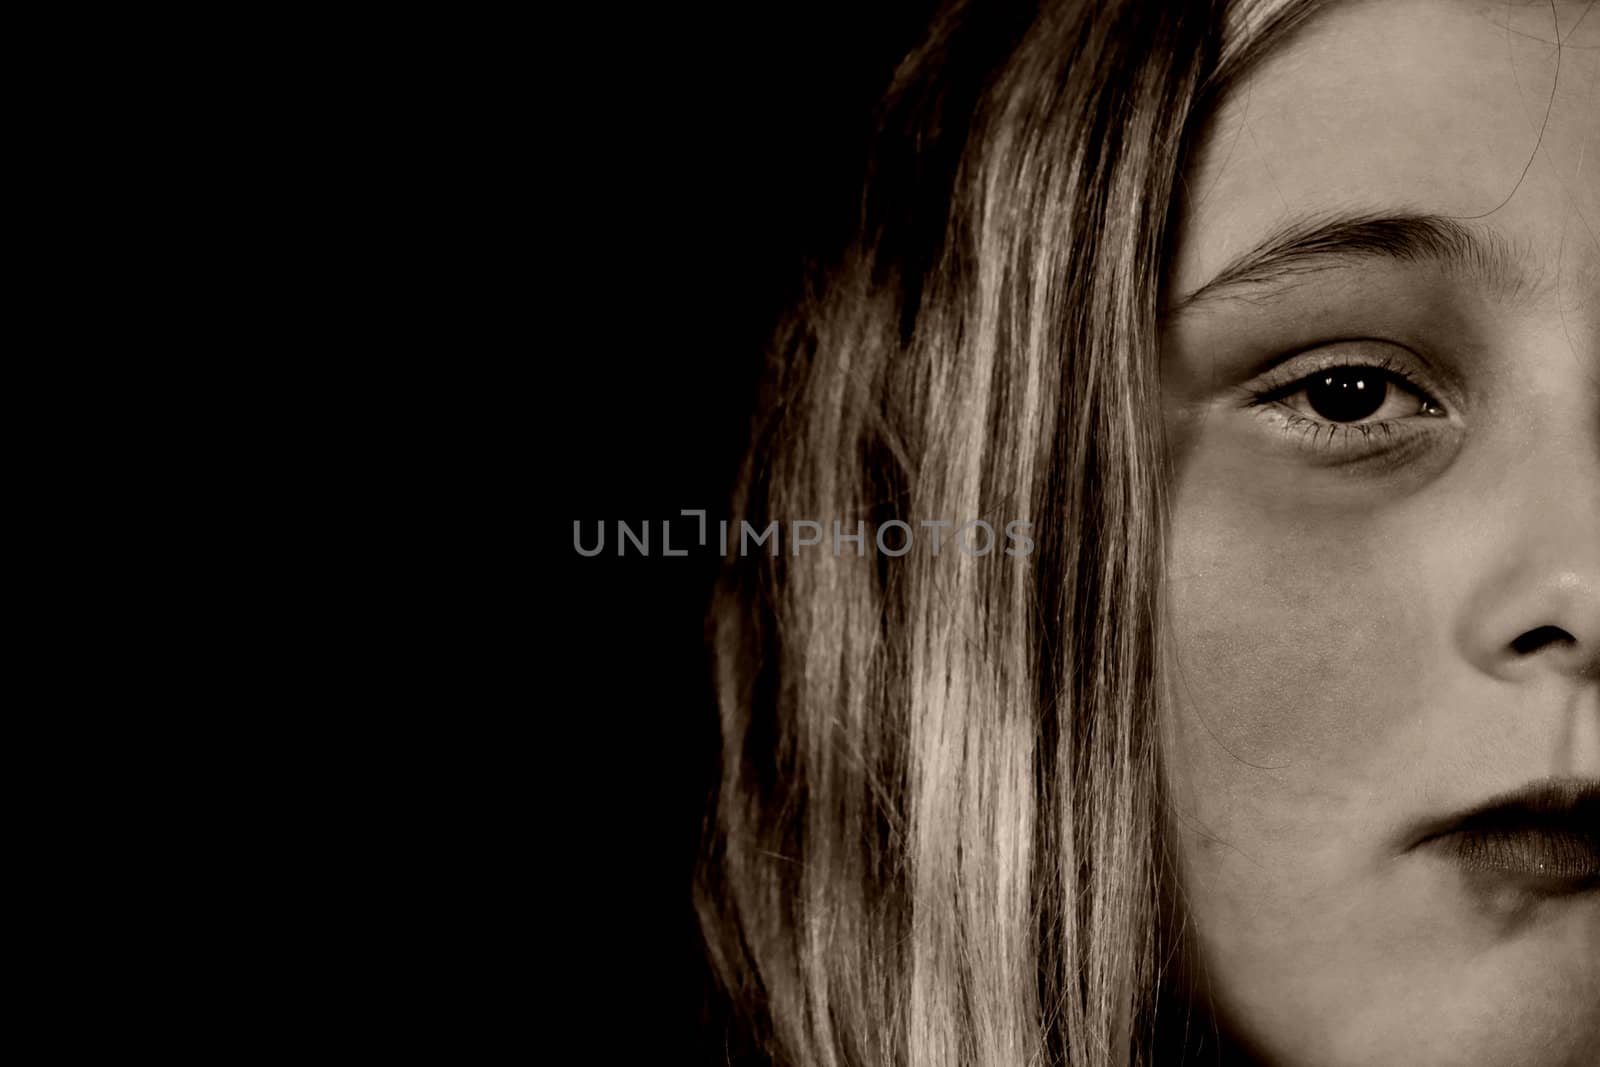 A young girl looking sullen because of child abuse and depression, isolated against a black background